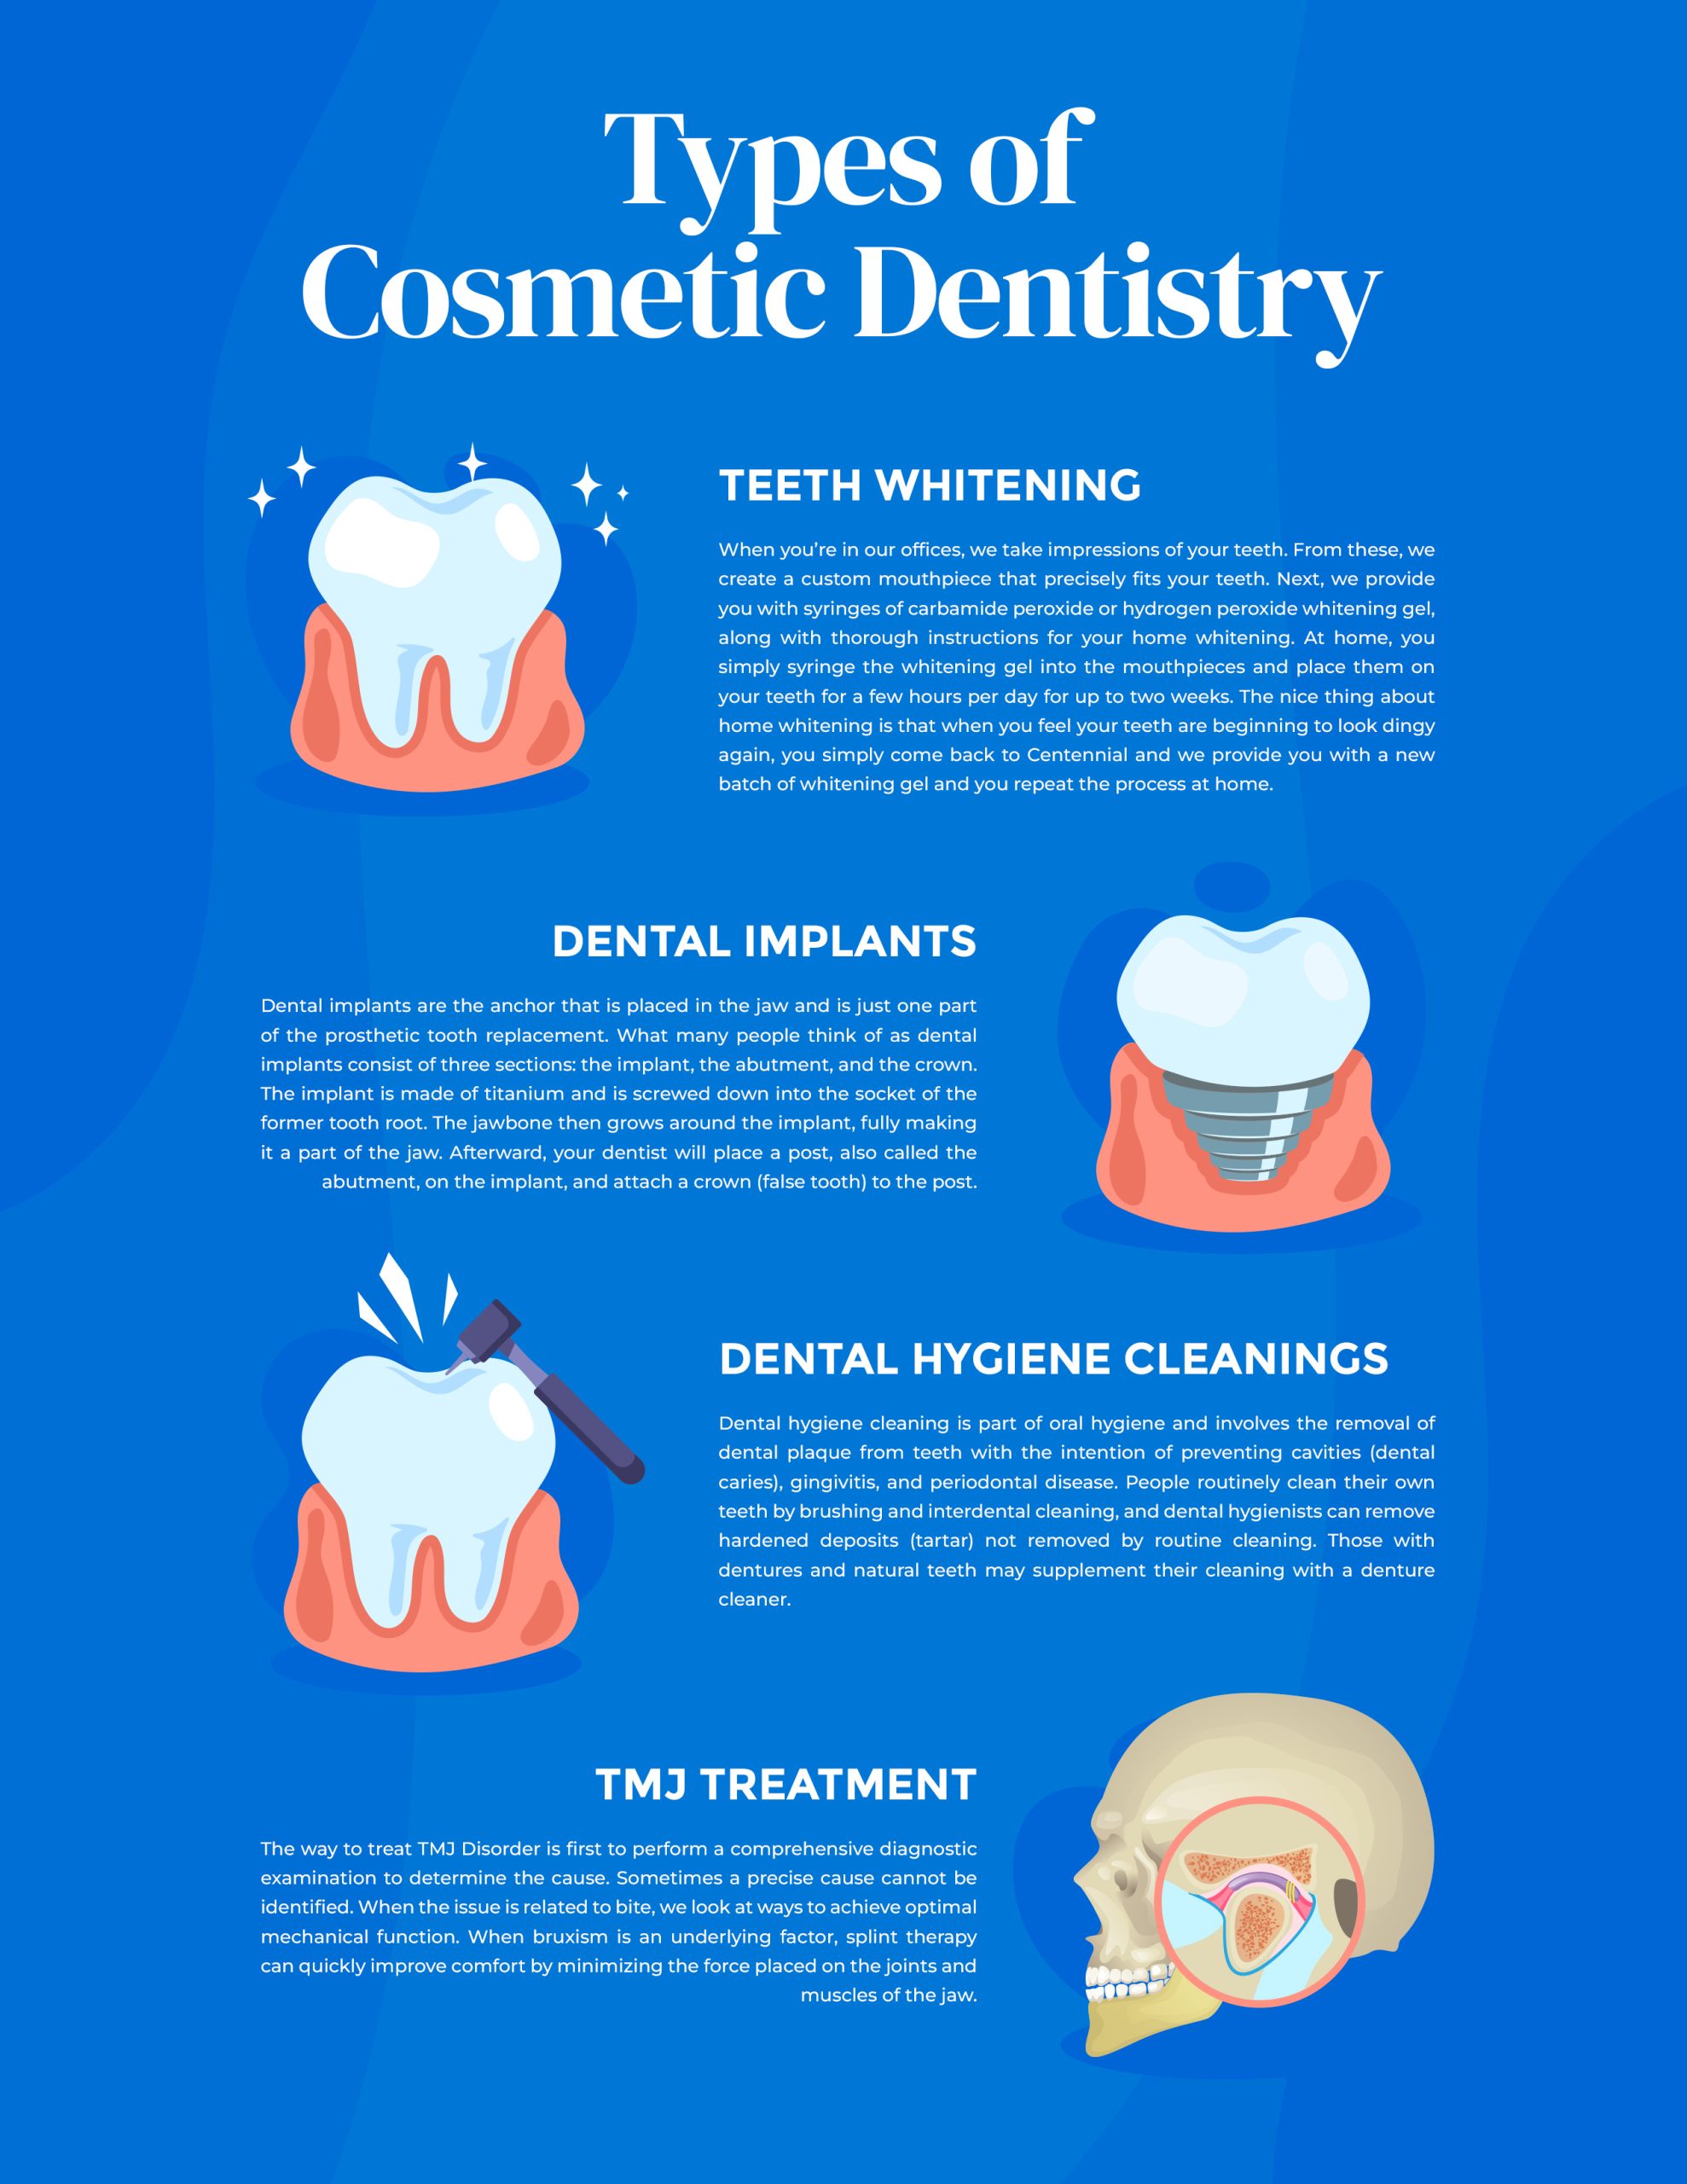 an infographic showing different types of cosmetic dentistry